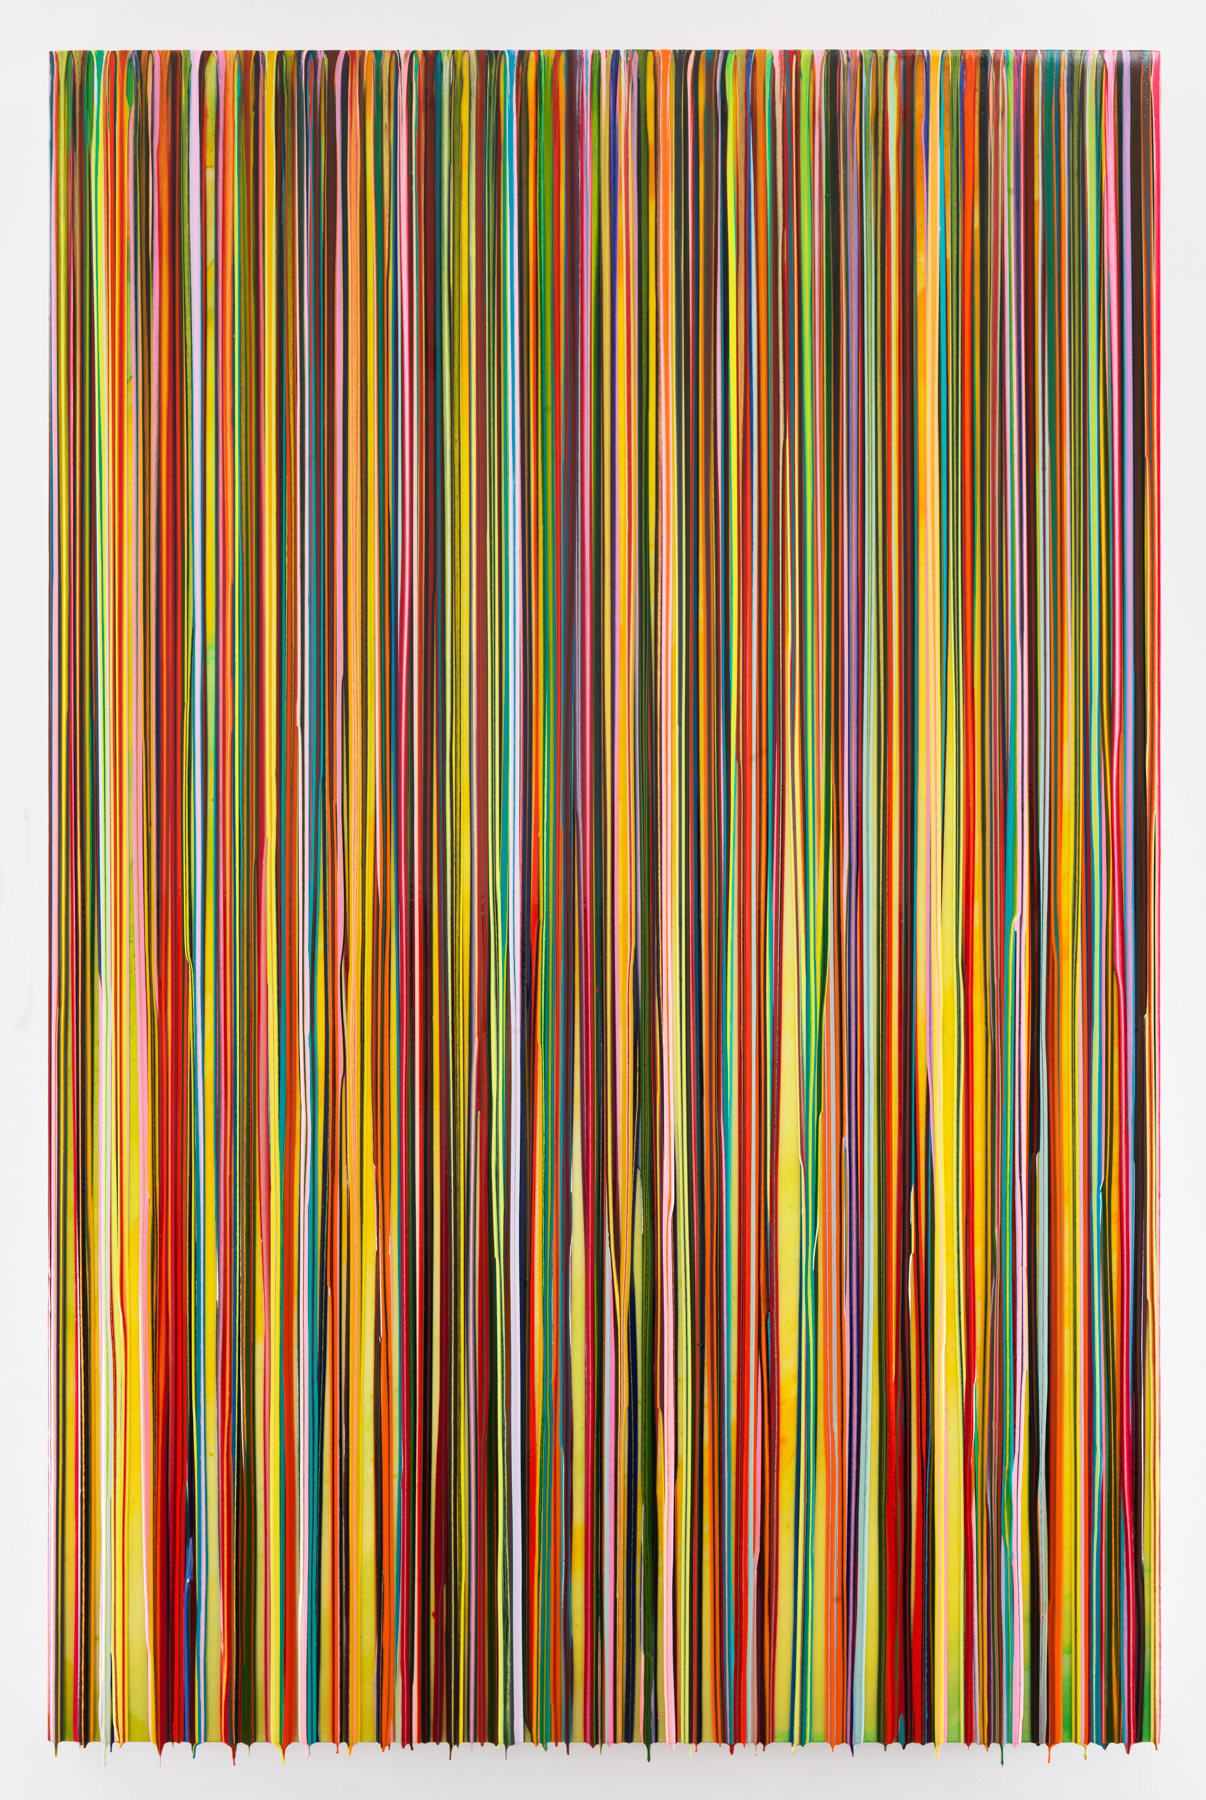 CANNOTGETUSEDTOTHEEVERYTHING, 2016, Epoxy resin and pigments on wood, 90 x 60 inches, 228.6 x 152.4 cm, AMY#28374